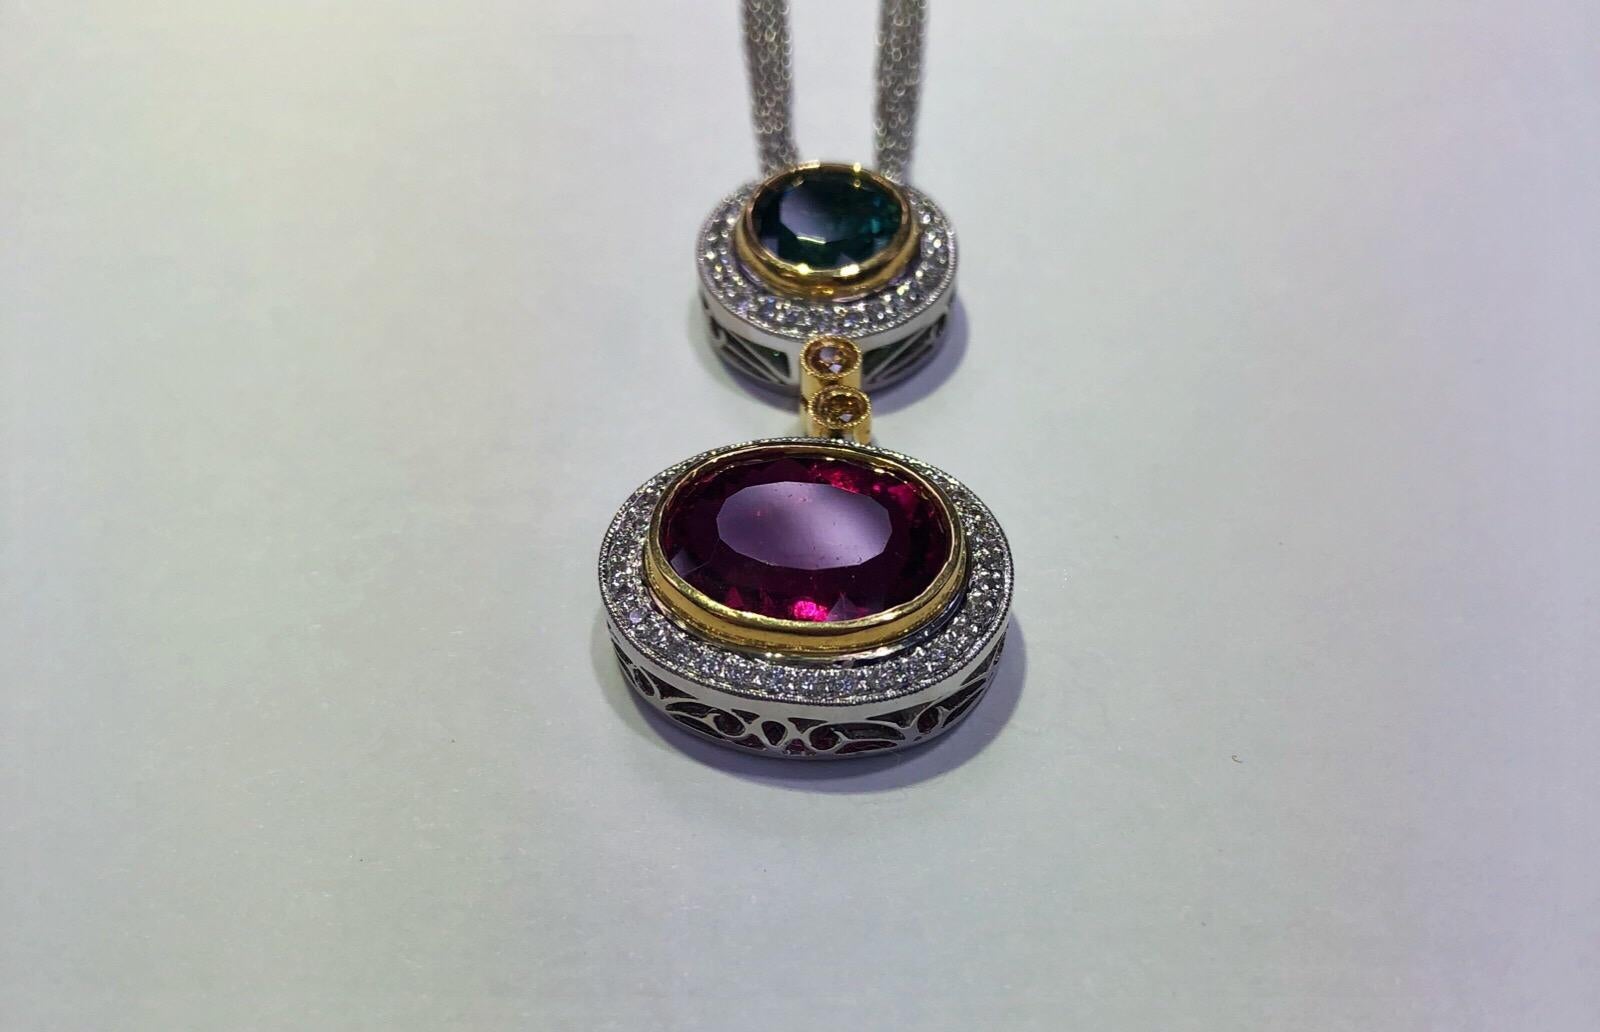 18k white and yellow gold Simon G pendant set with one bezel-set 5.41 carat oval cut Rubelite center, one bezel-set 1.63 carat round green tourmaline center. Has a 0.07 carat total weight of two round brilliant yellow diamonds, and 0.56 carats total